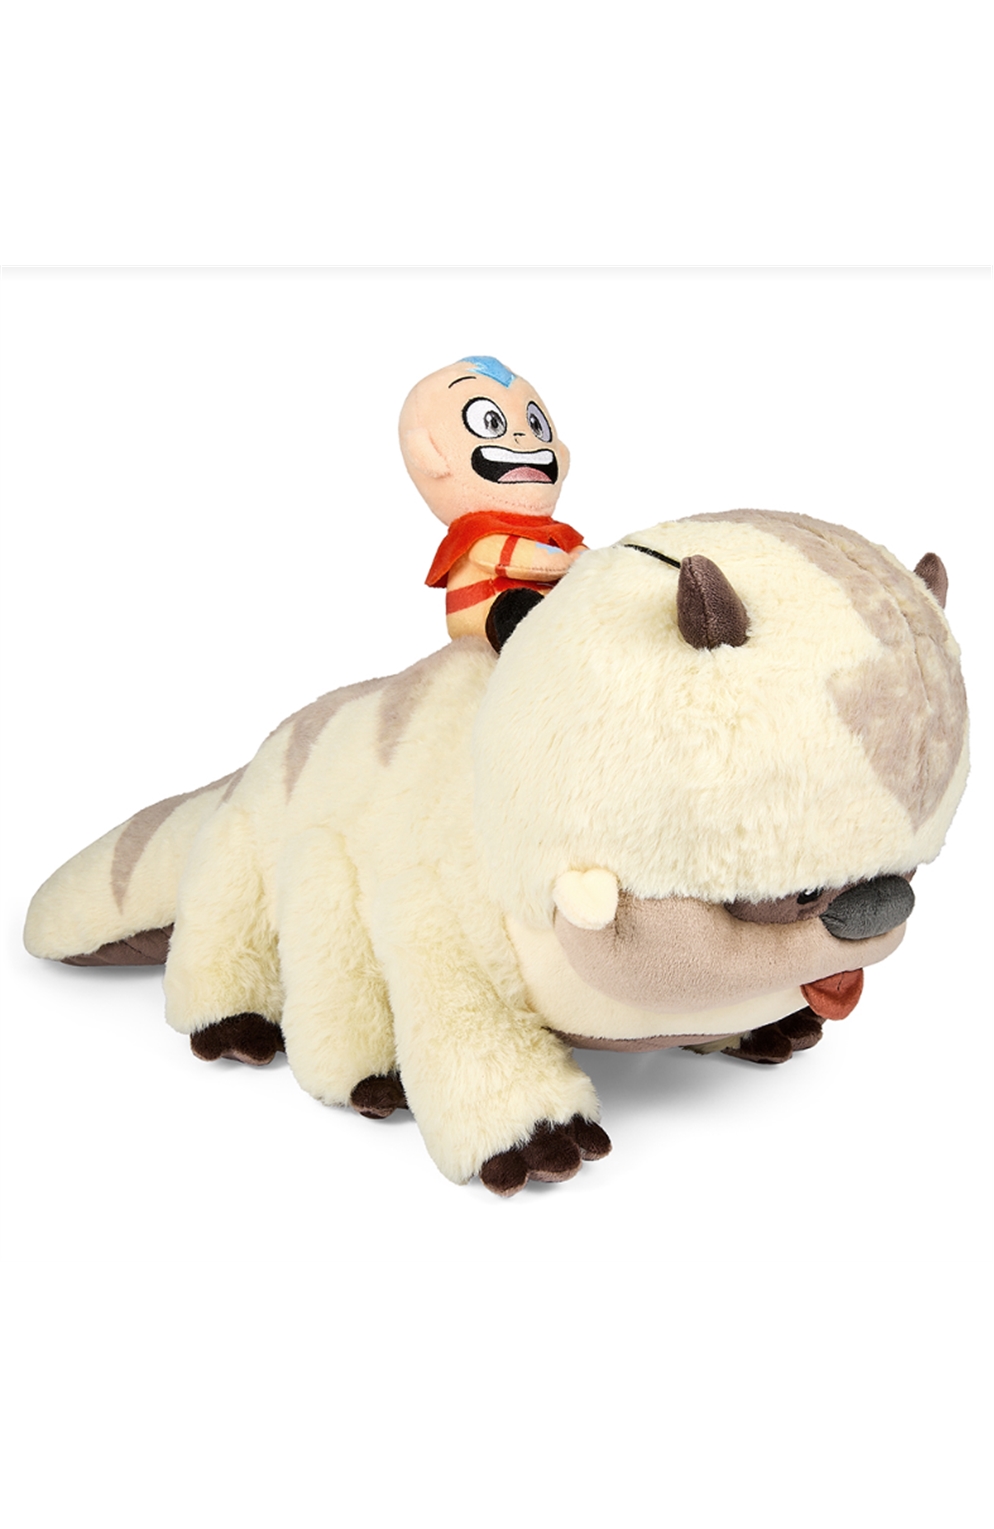 Avatar: The Last Airbender 18” Plush - Appa With Aang